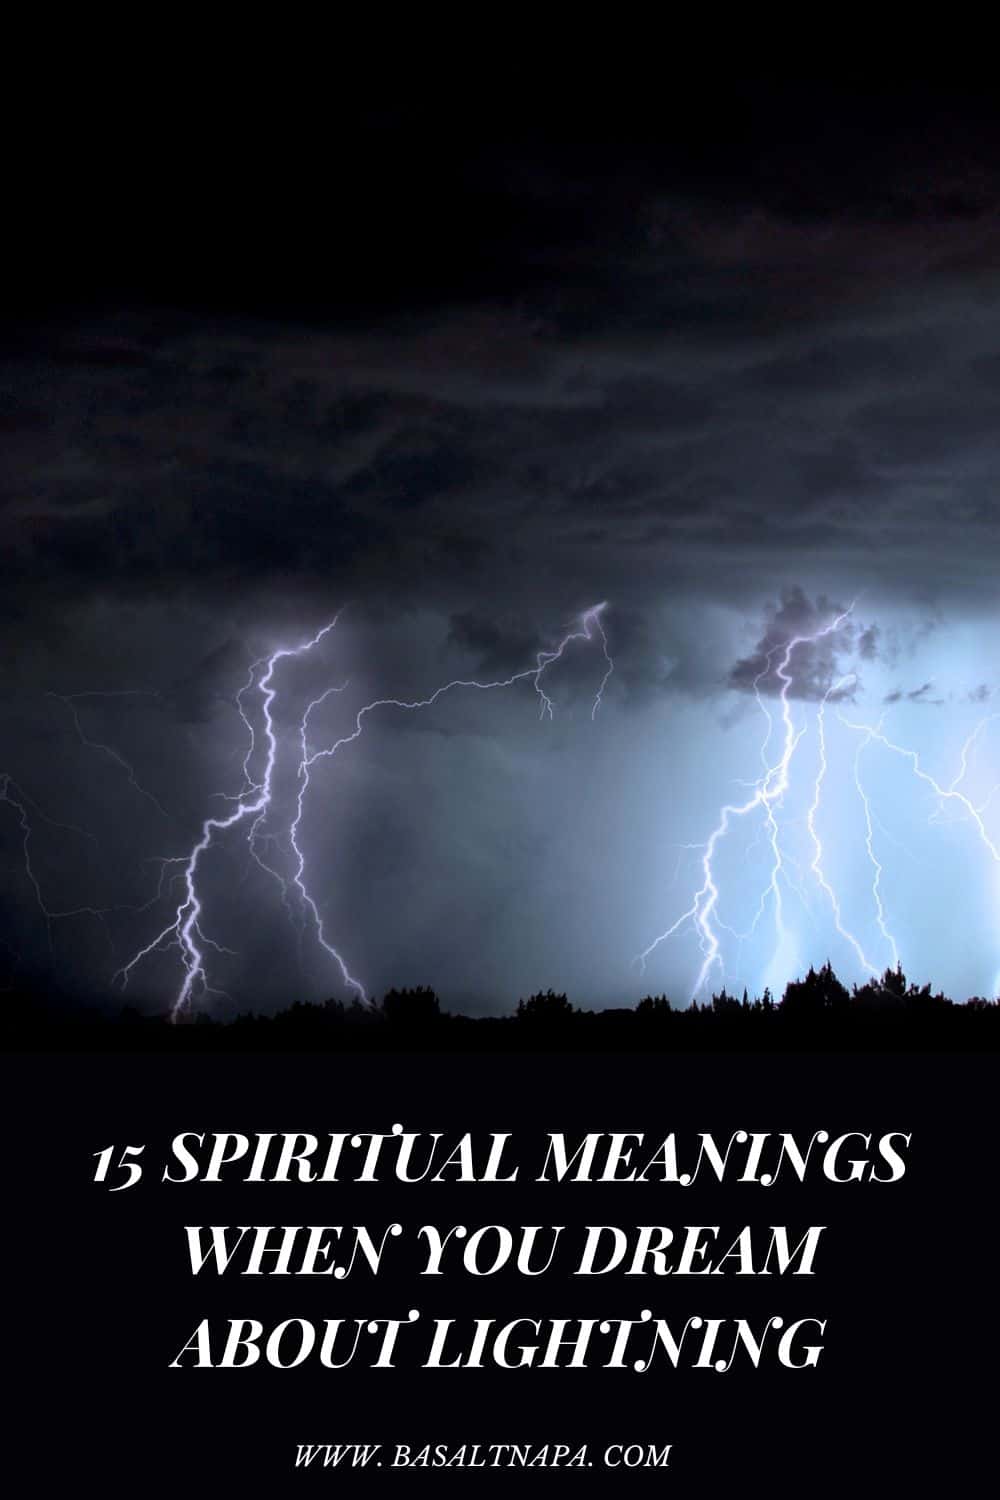 Spiritual meaning of dreams about lightning